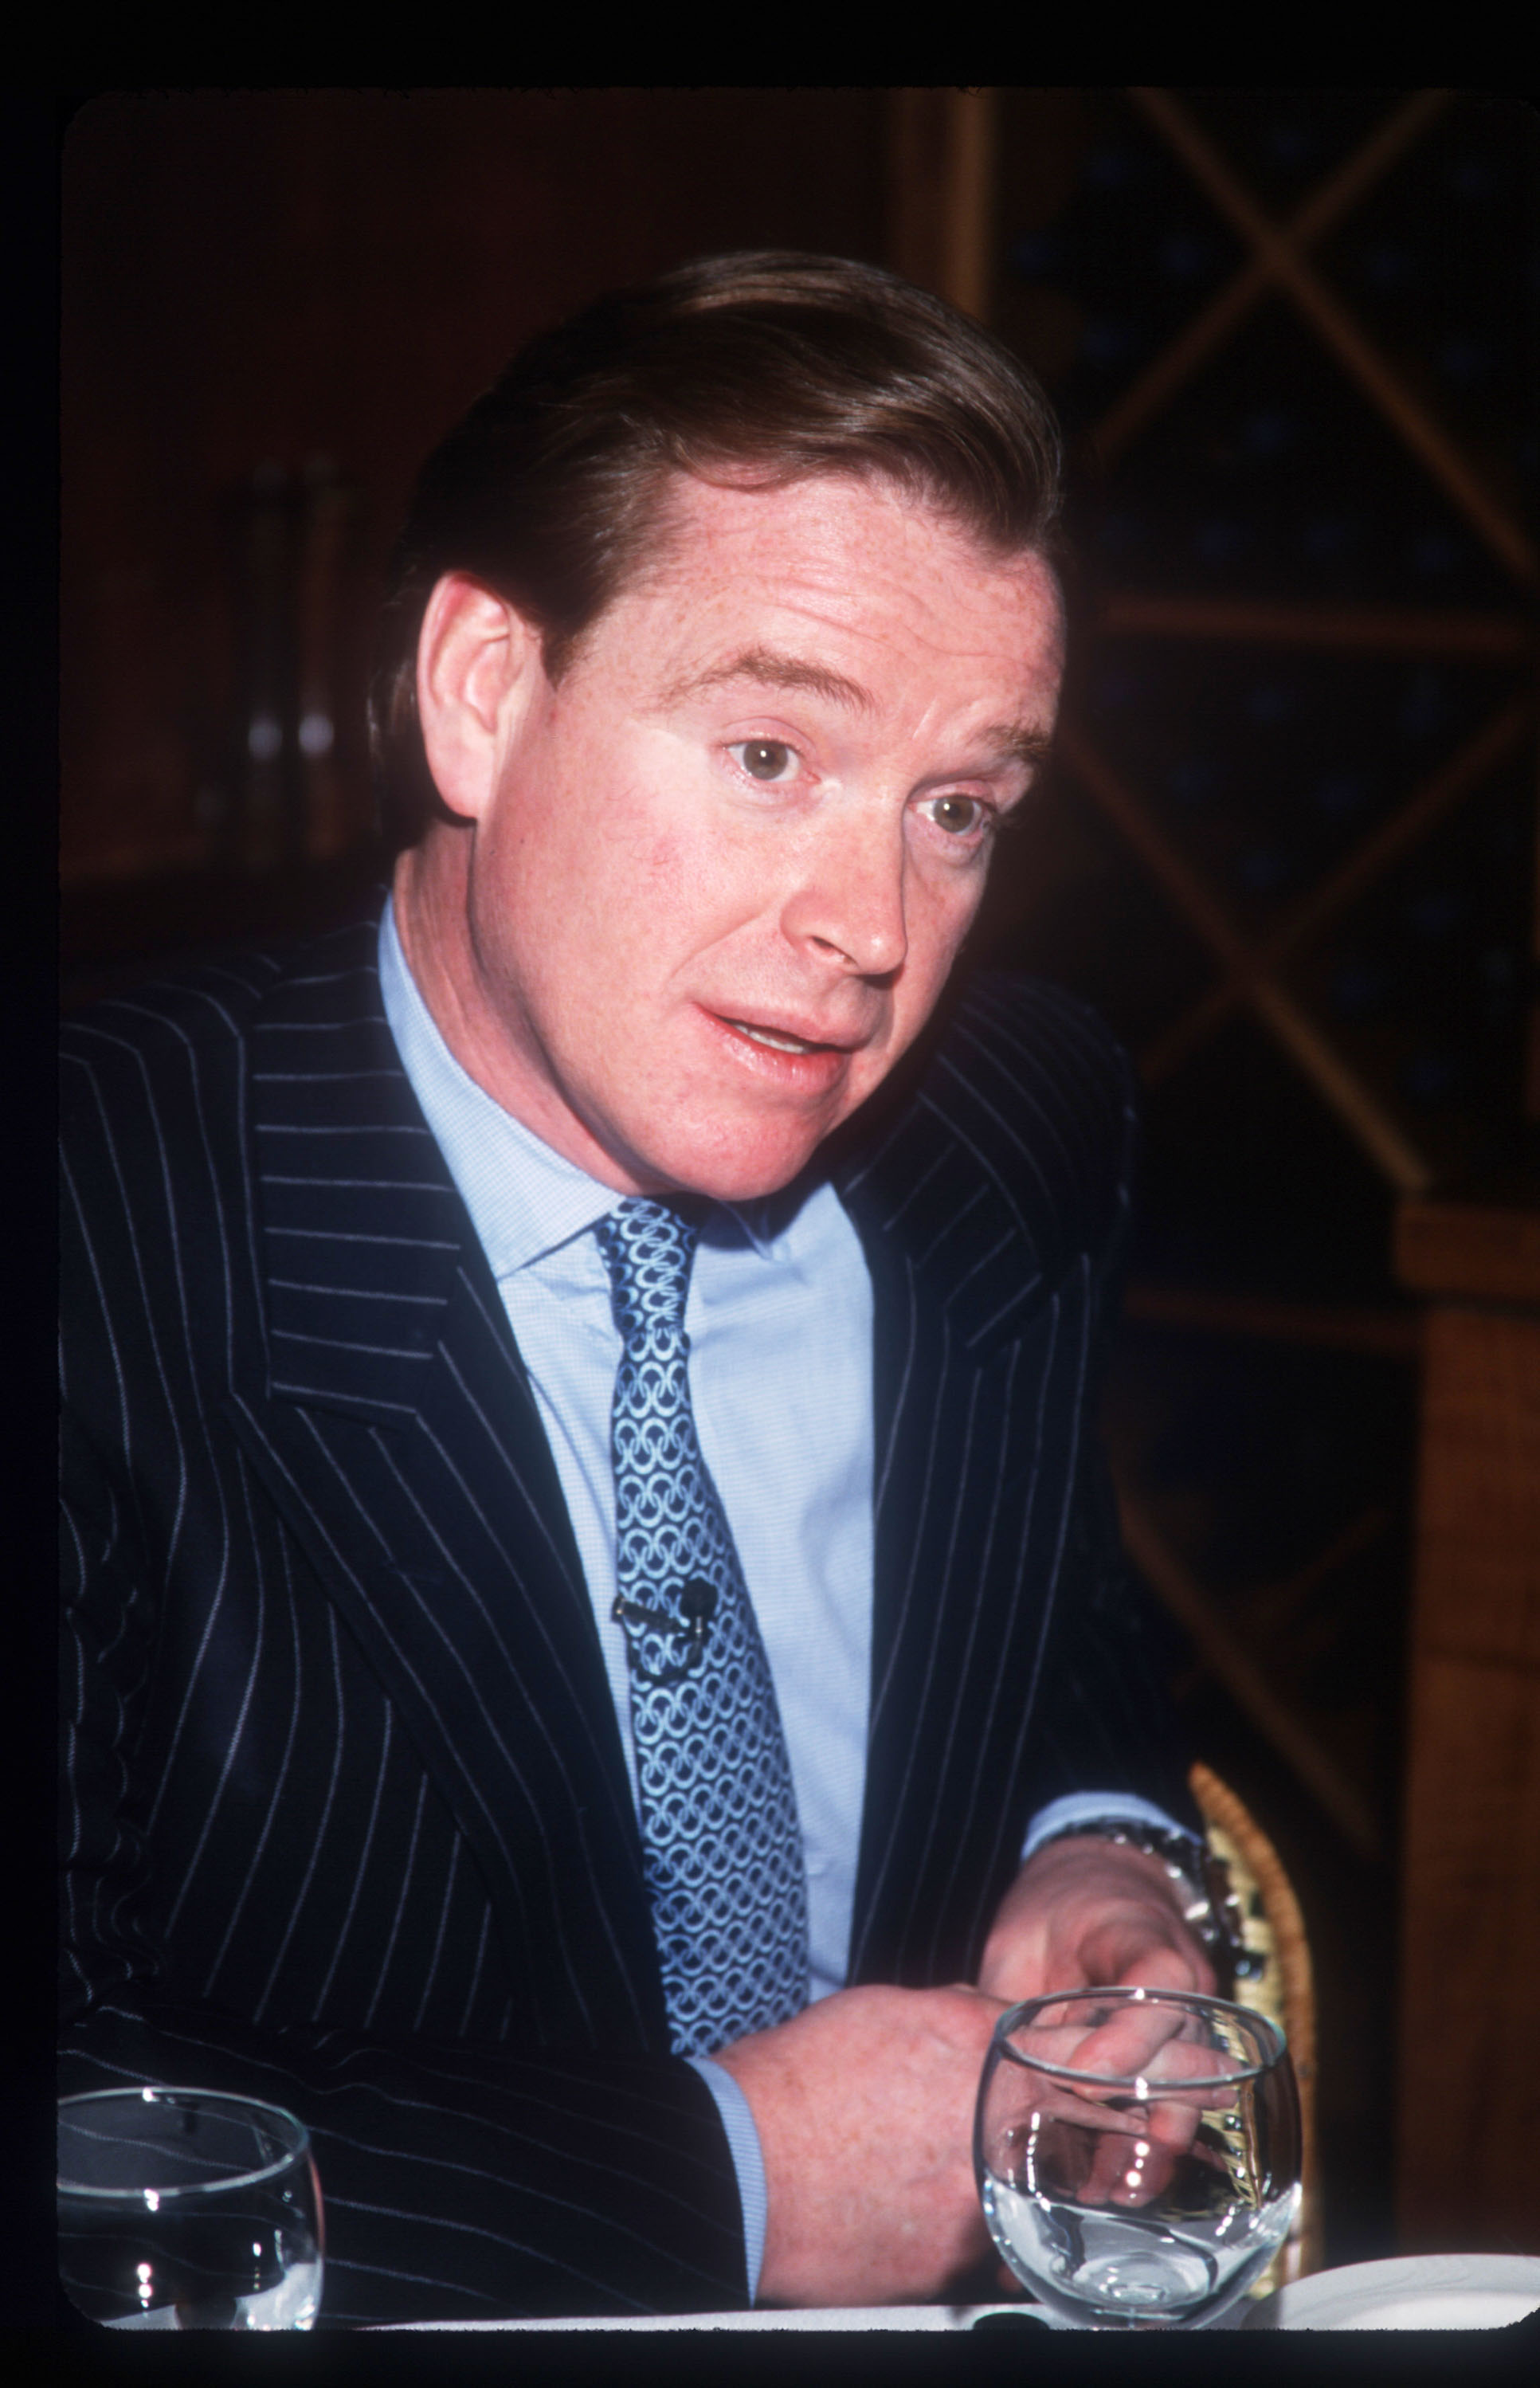 James Hewitt presents his book "Love and War" during an interview with Daphne Barak in New York City, on October 25, 1999. | Source: Getty Images